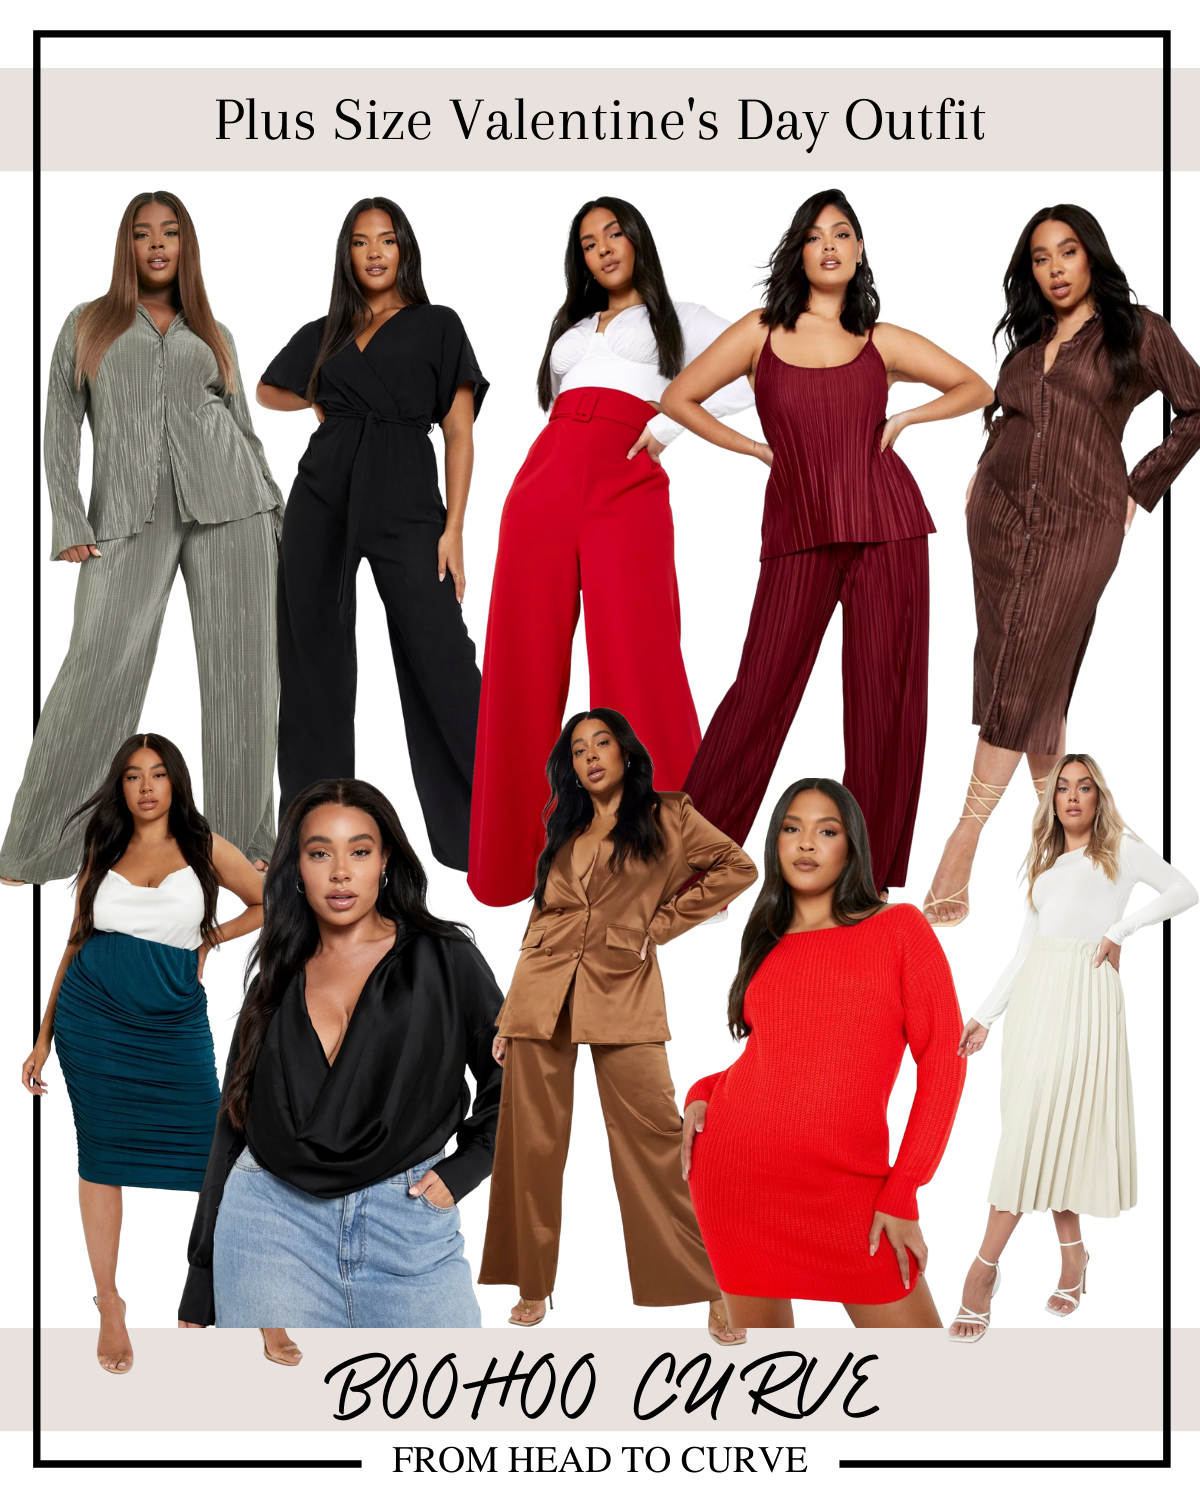 How to style Boohoo Plus Size Outfits for Valentine's Day - From